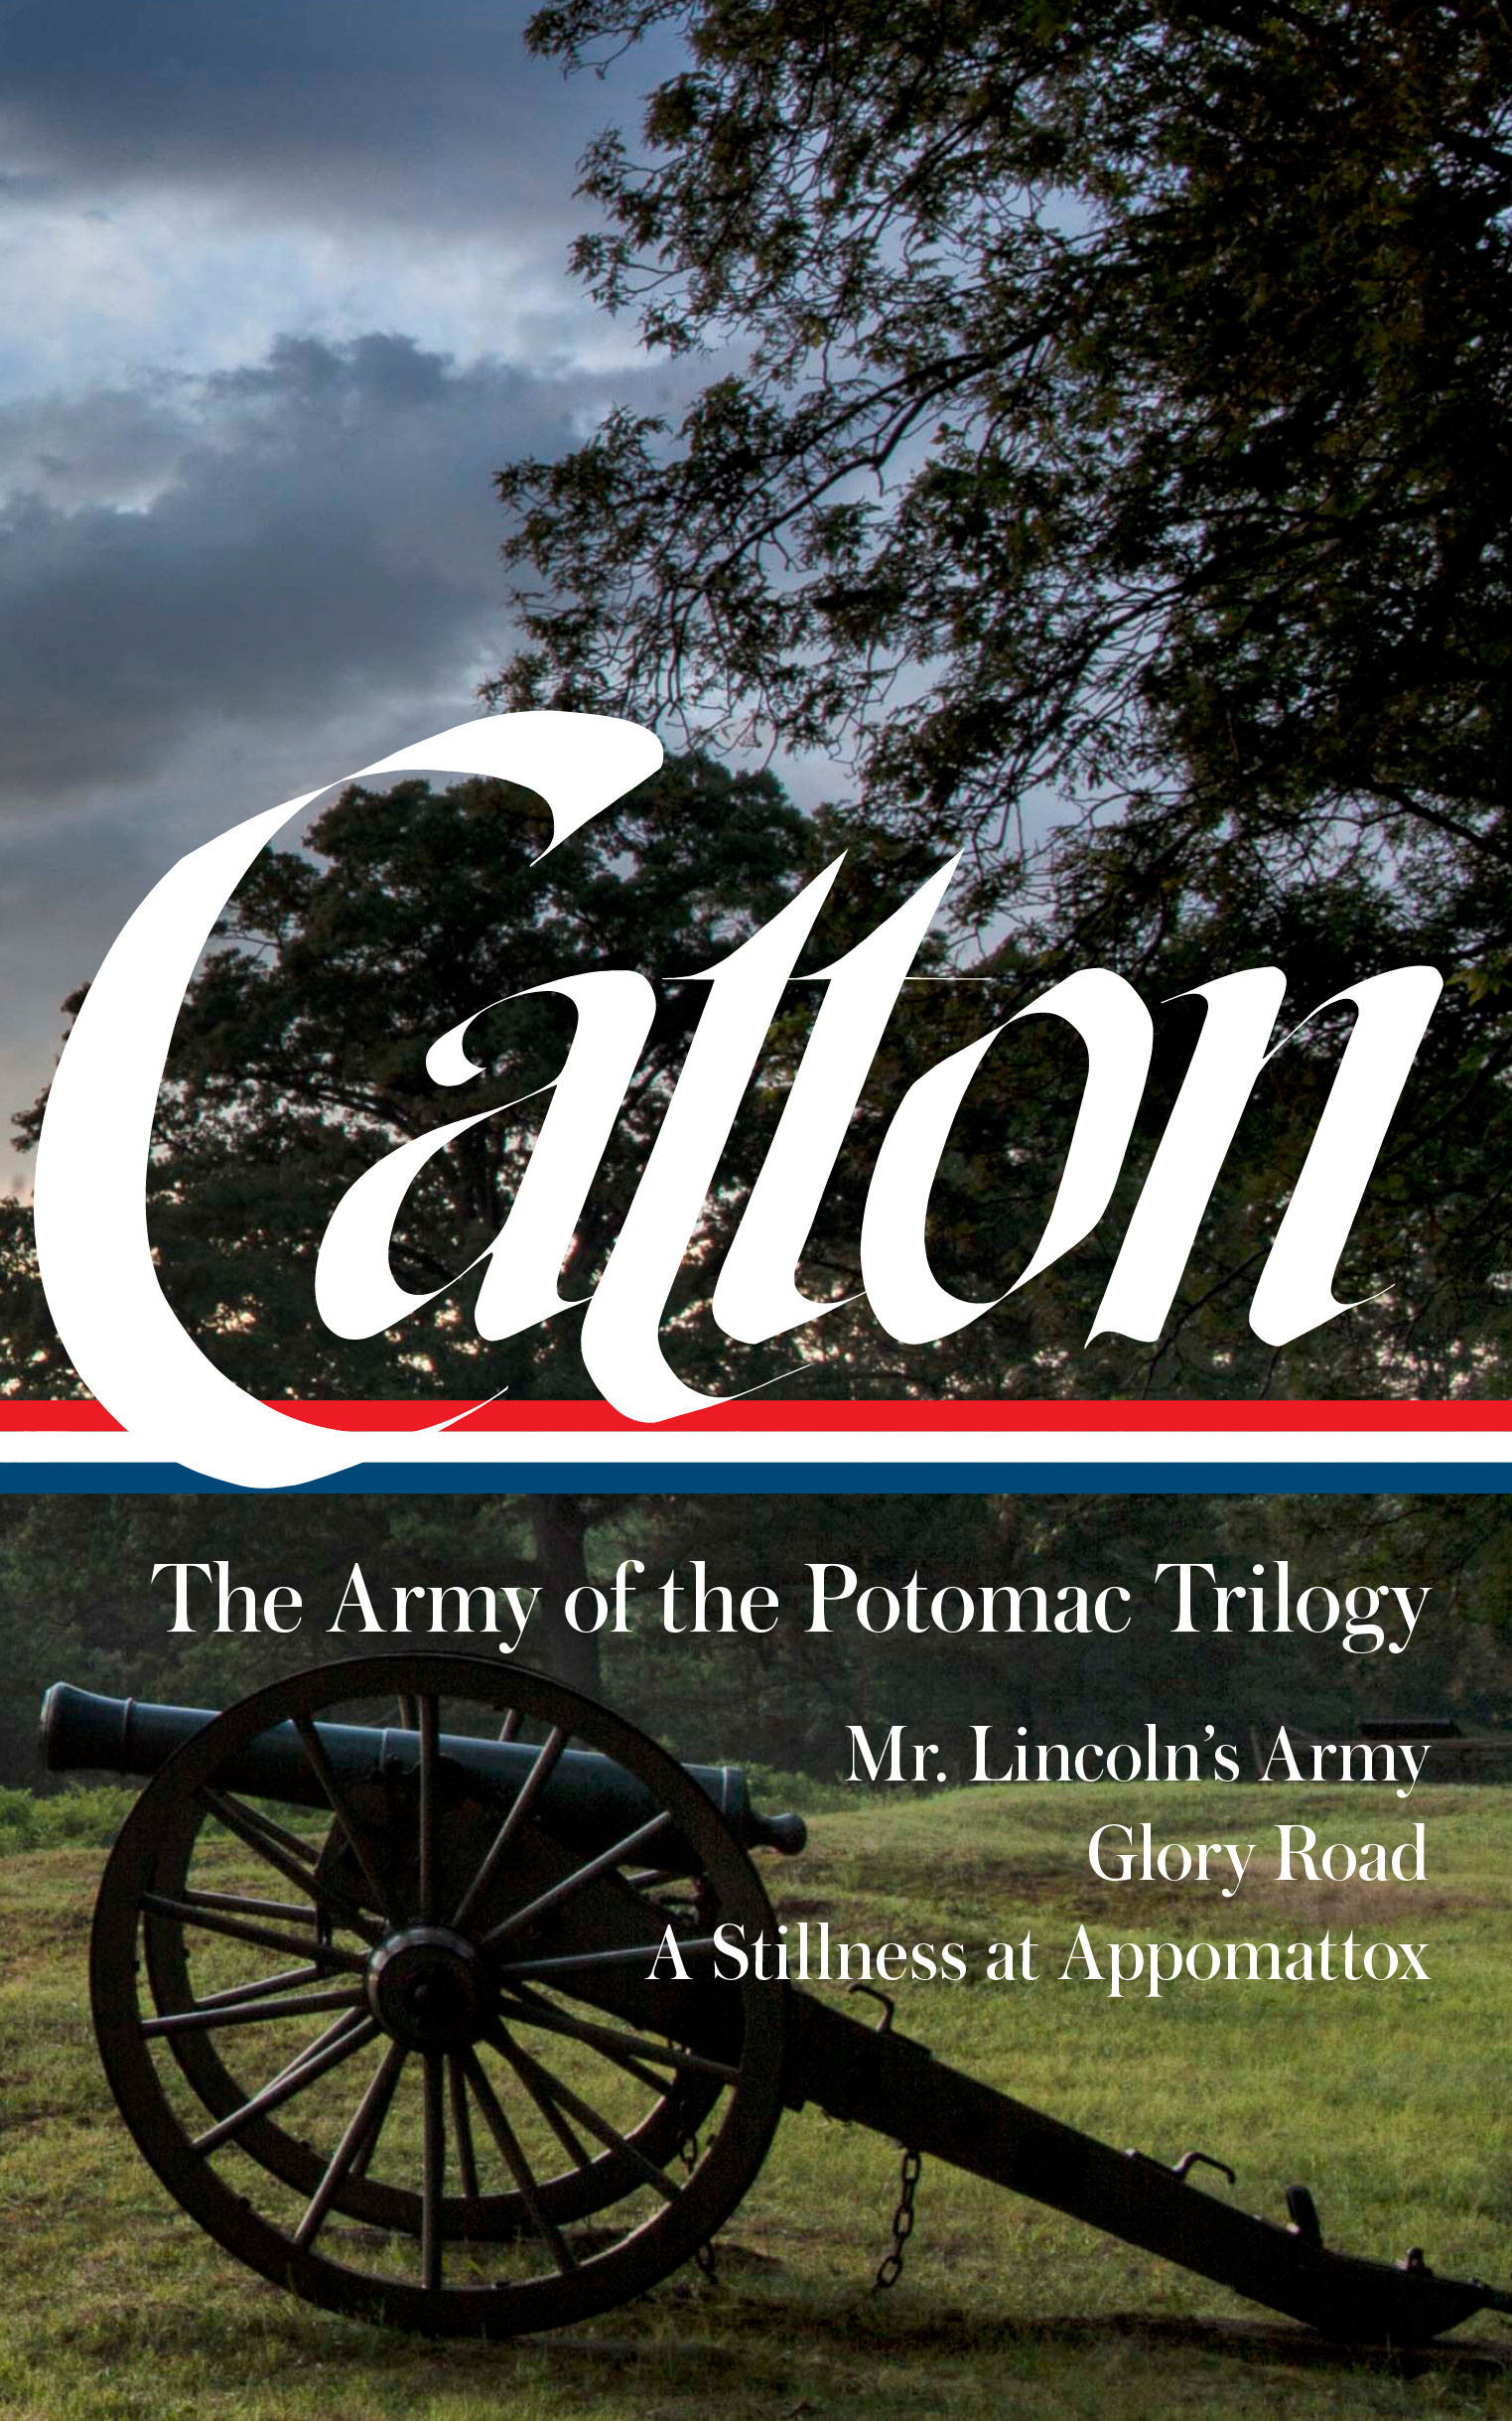 Bruce Catton: The Army of the Potomac Trilogy (LOA #359) : Mr. Lincoln's Army / Glory Road / A Stillness at Appomattox | Catton, Bruce